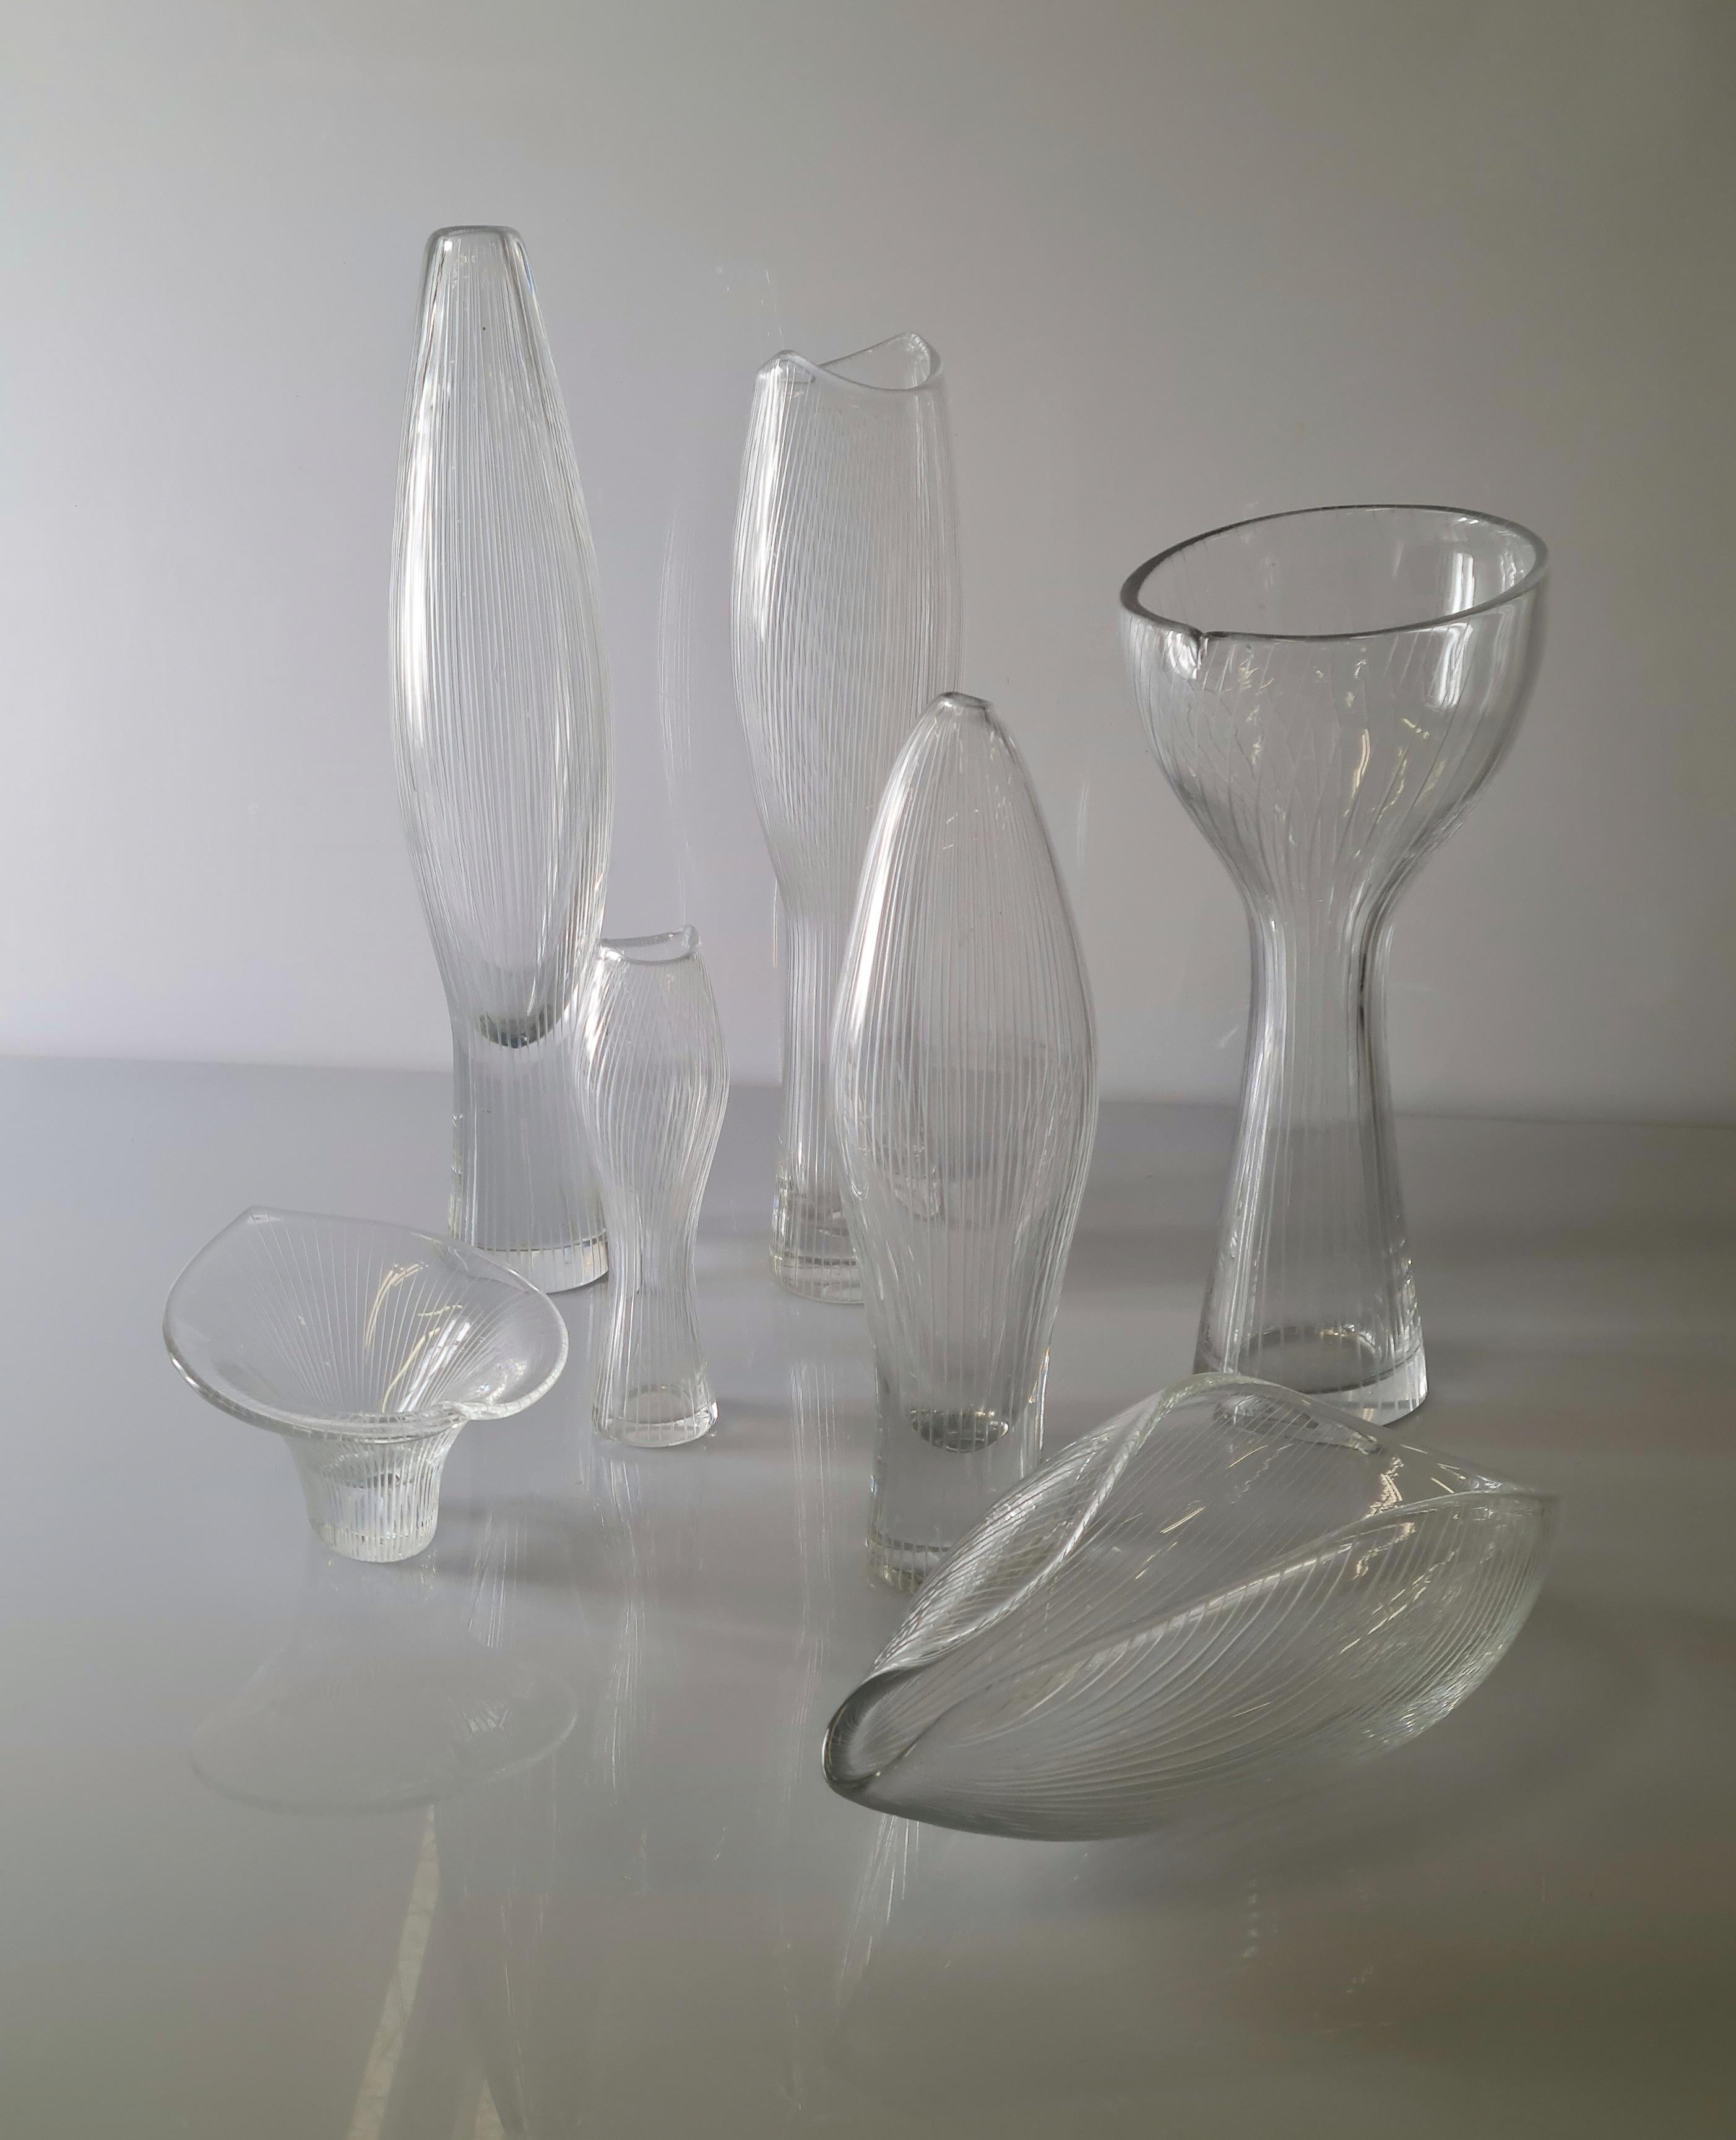 A Variety of Art Glass Objects by Tapio Wirkkala for Iittala, 1950s For Sale 8